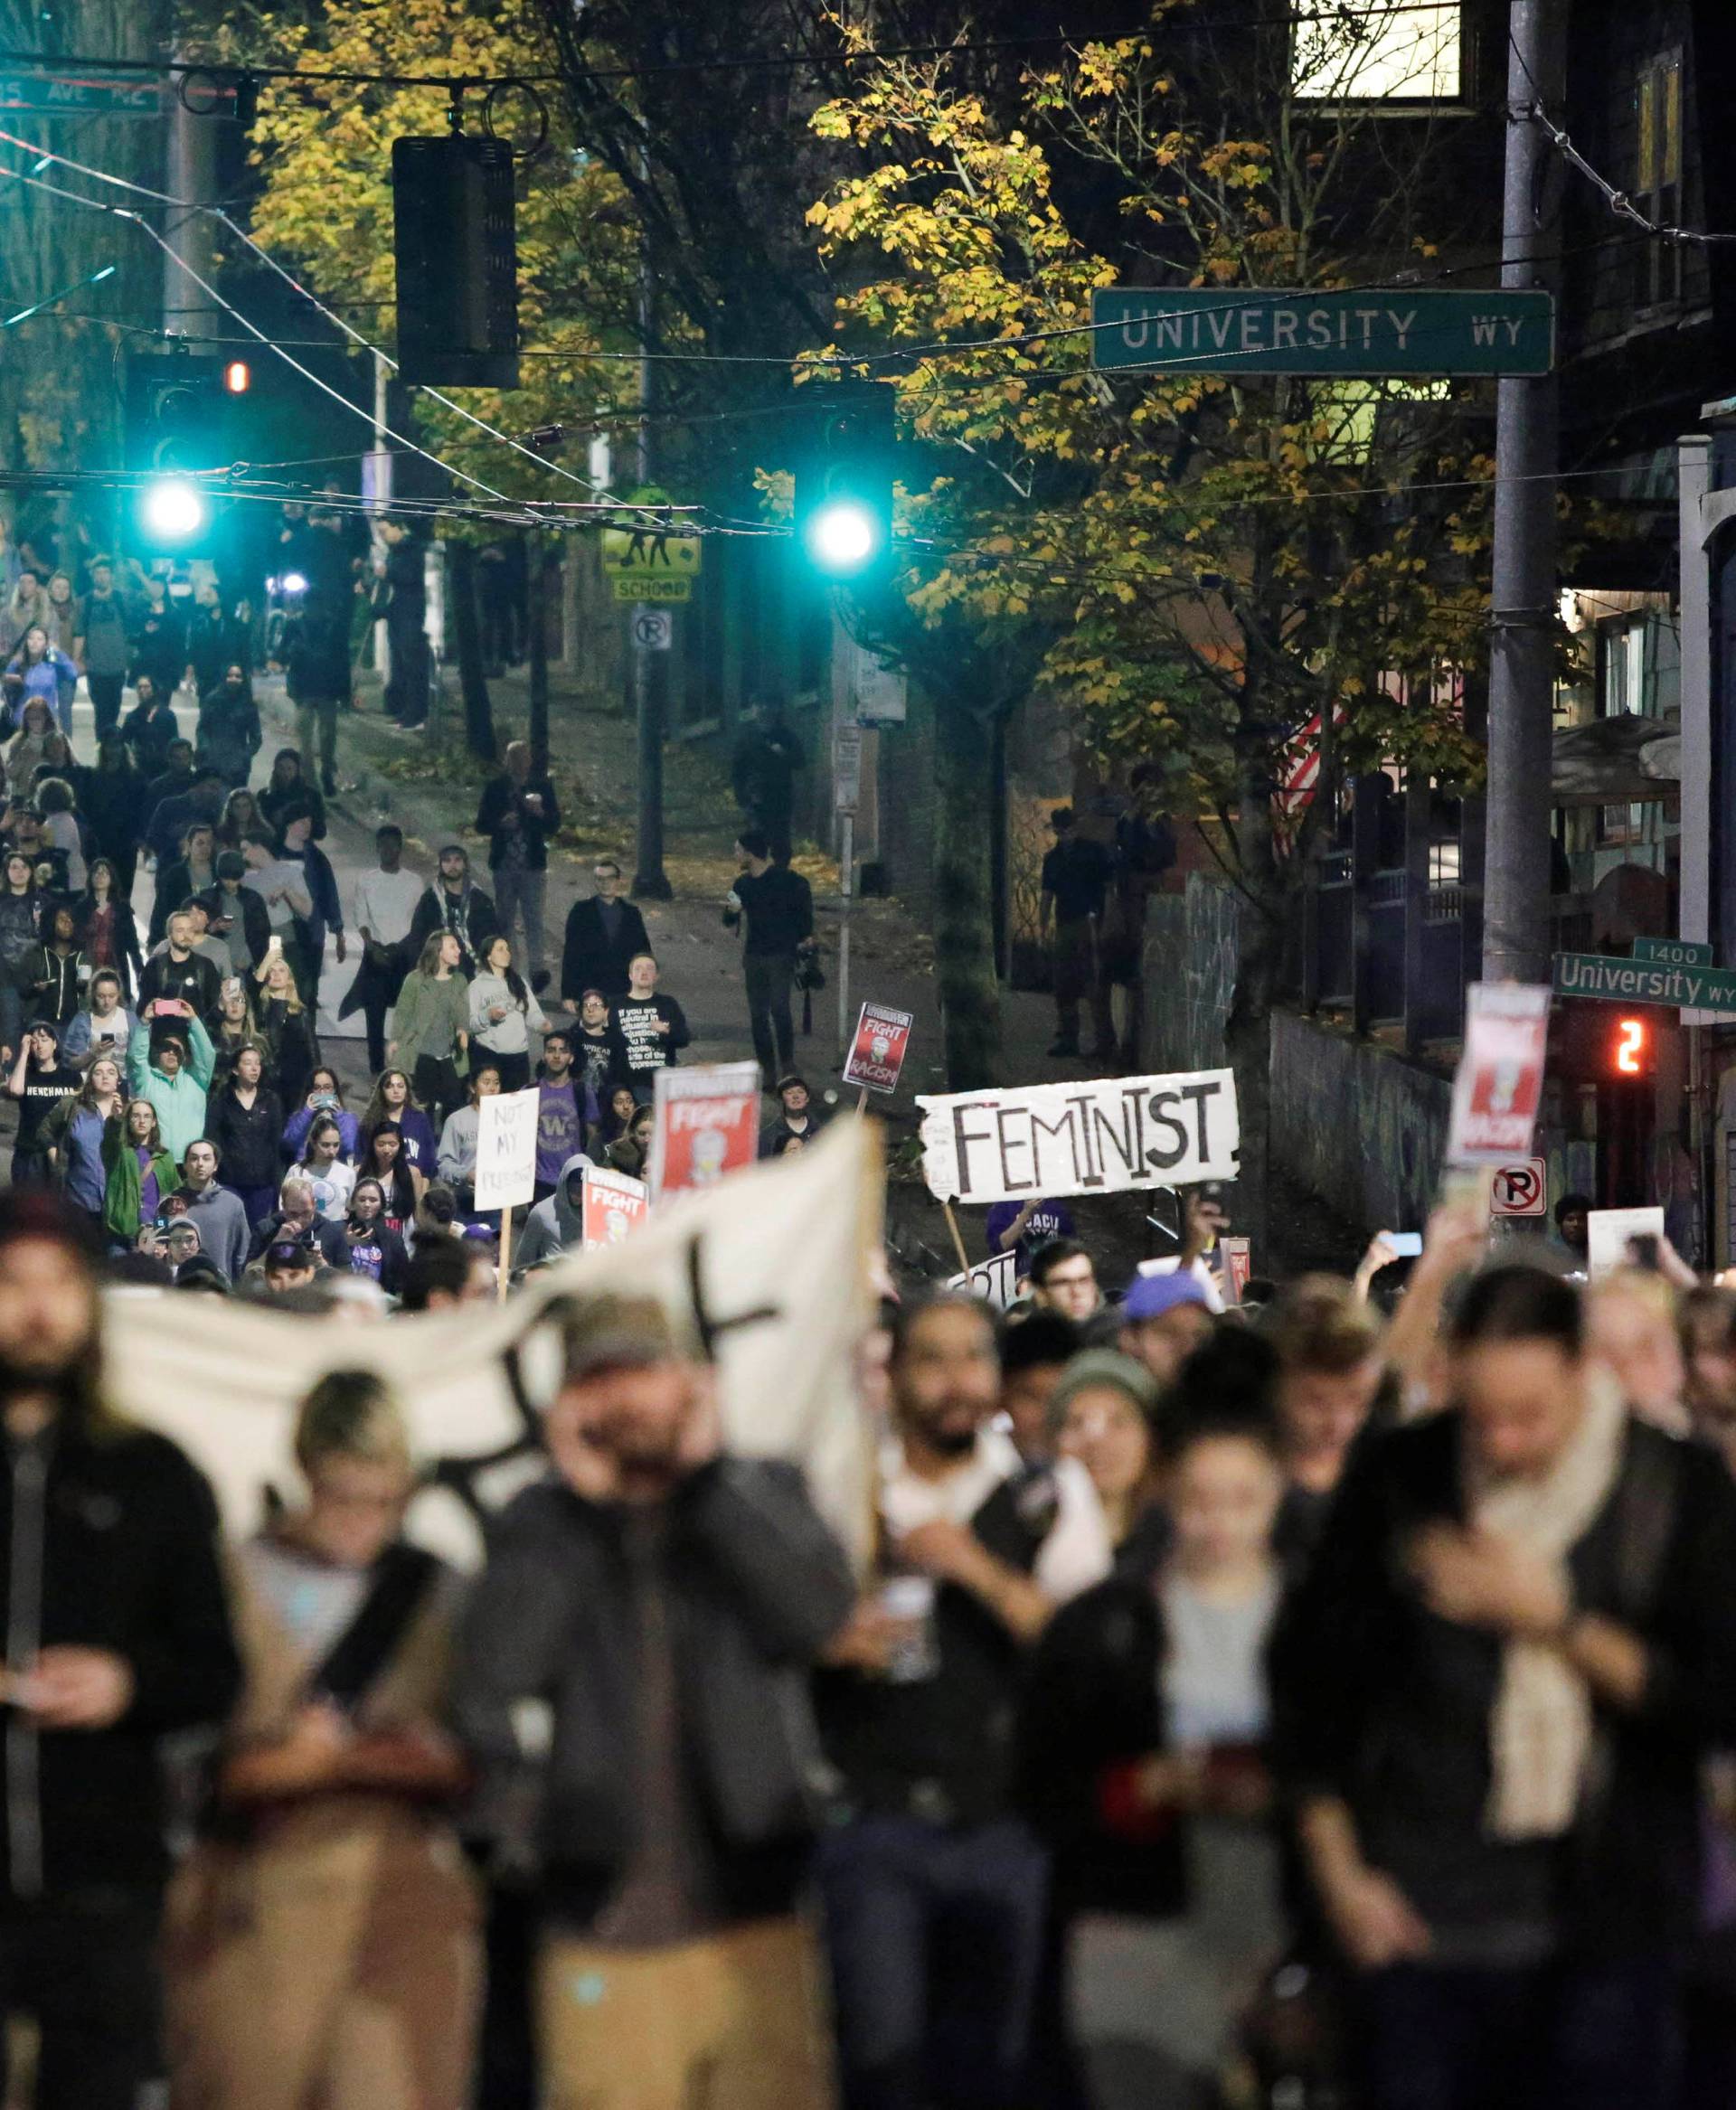 People march in protest to the election of Republican Donald Trump as the president of the United States in Seattle, Washington